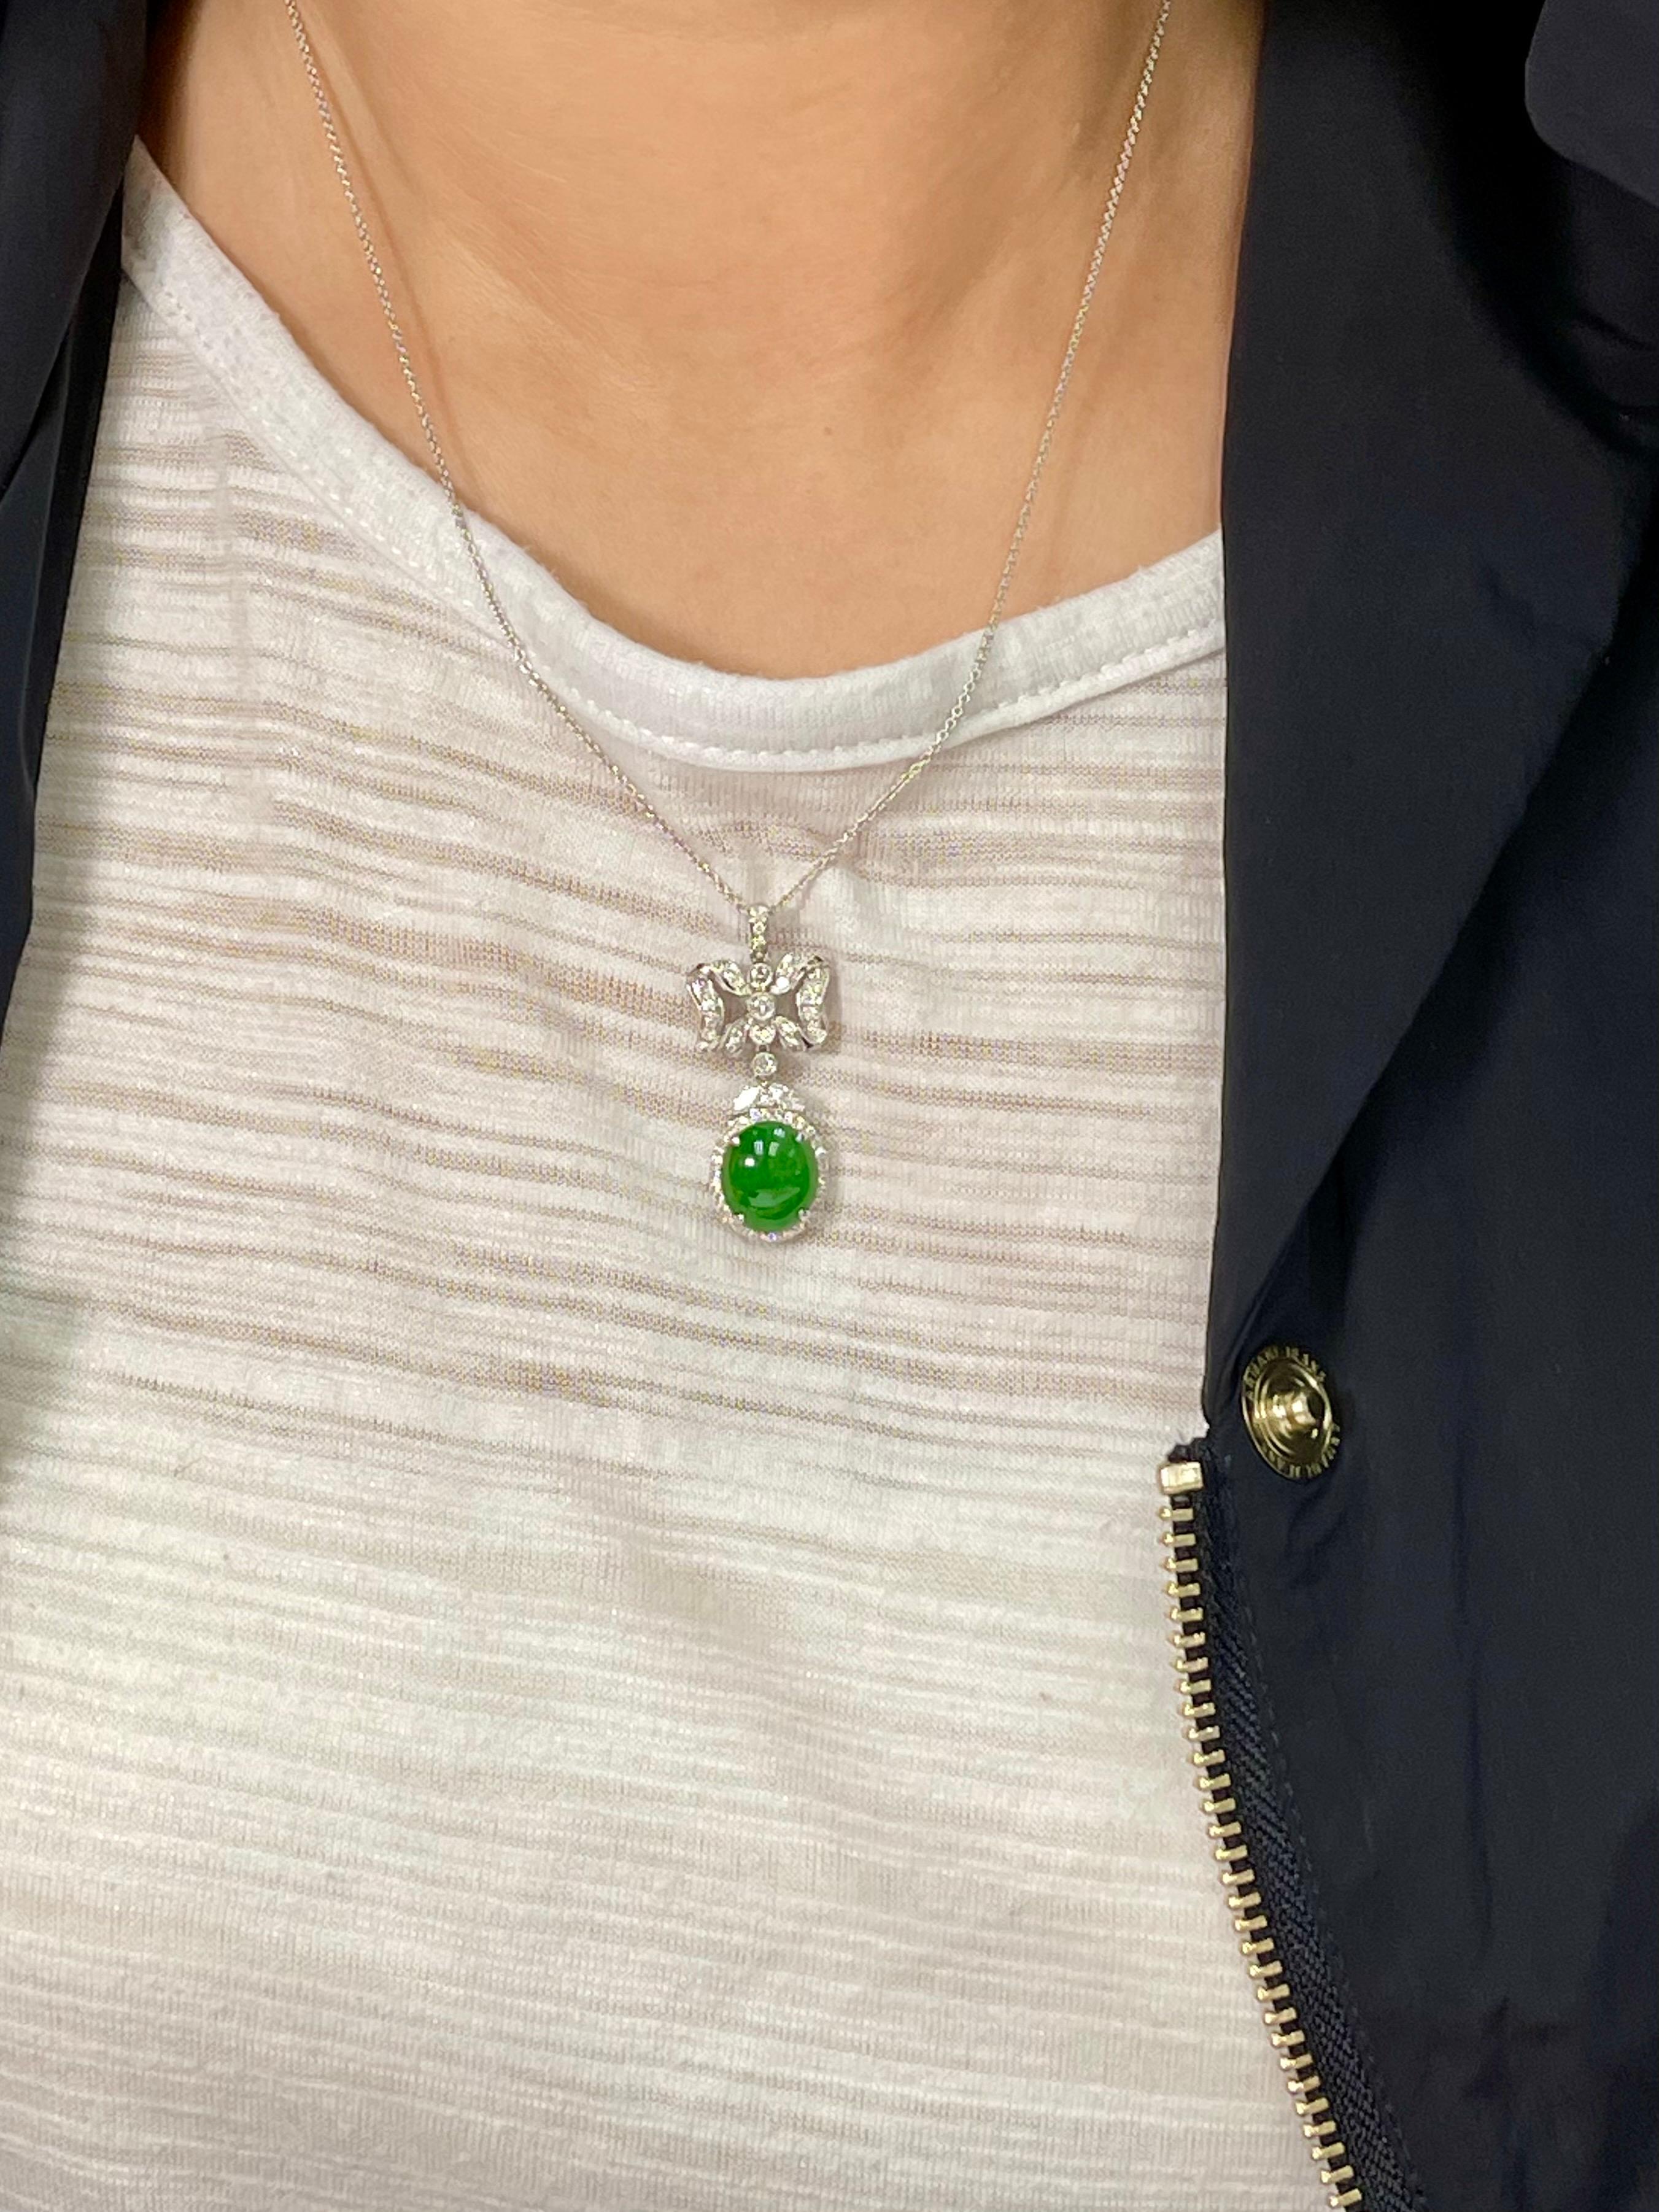 Here is a natural deep green Jade and diamond pendant. The pendant is set in 18k white gold and diamonds. There are estimated 0.75Cts of diamonds set in this drop pendant. The untreated / unenhanced natural jade is full of life. The color is dark